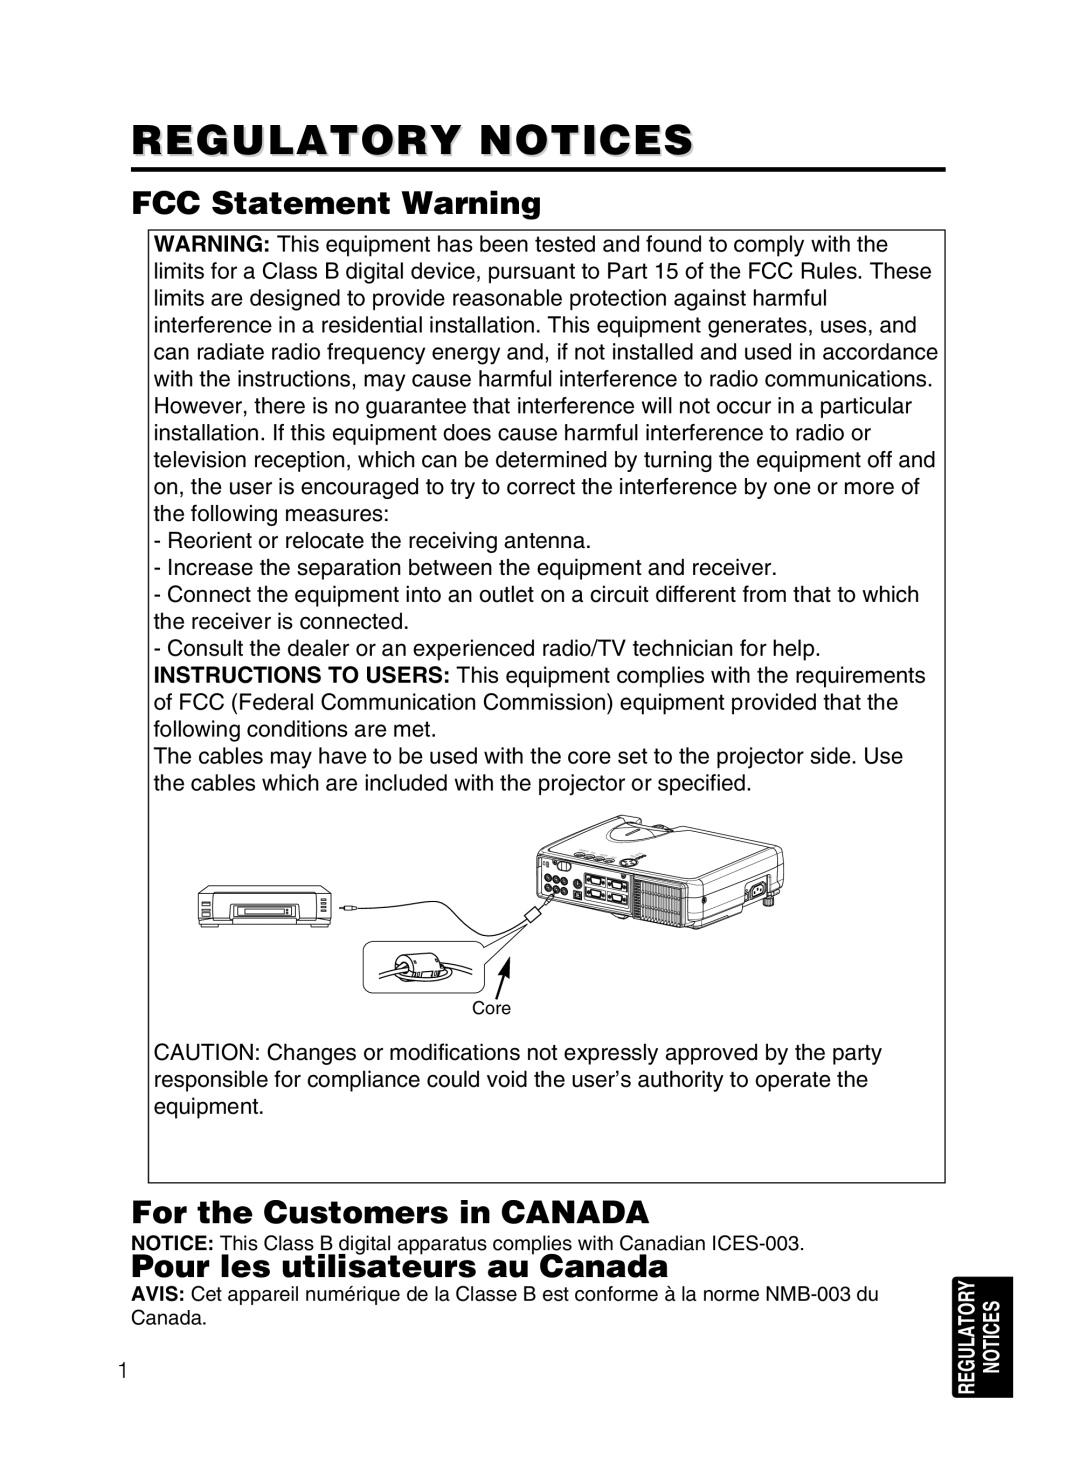 Dukane 28A8049B Regulatory Notices, FCC Statement Warning, For the Customers in CANADA, Pour les utilisateurs au Canada 